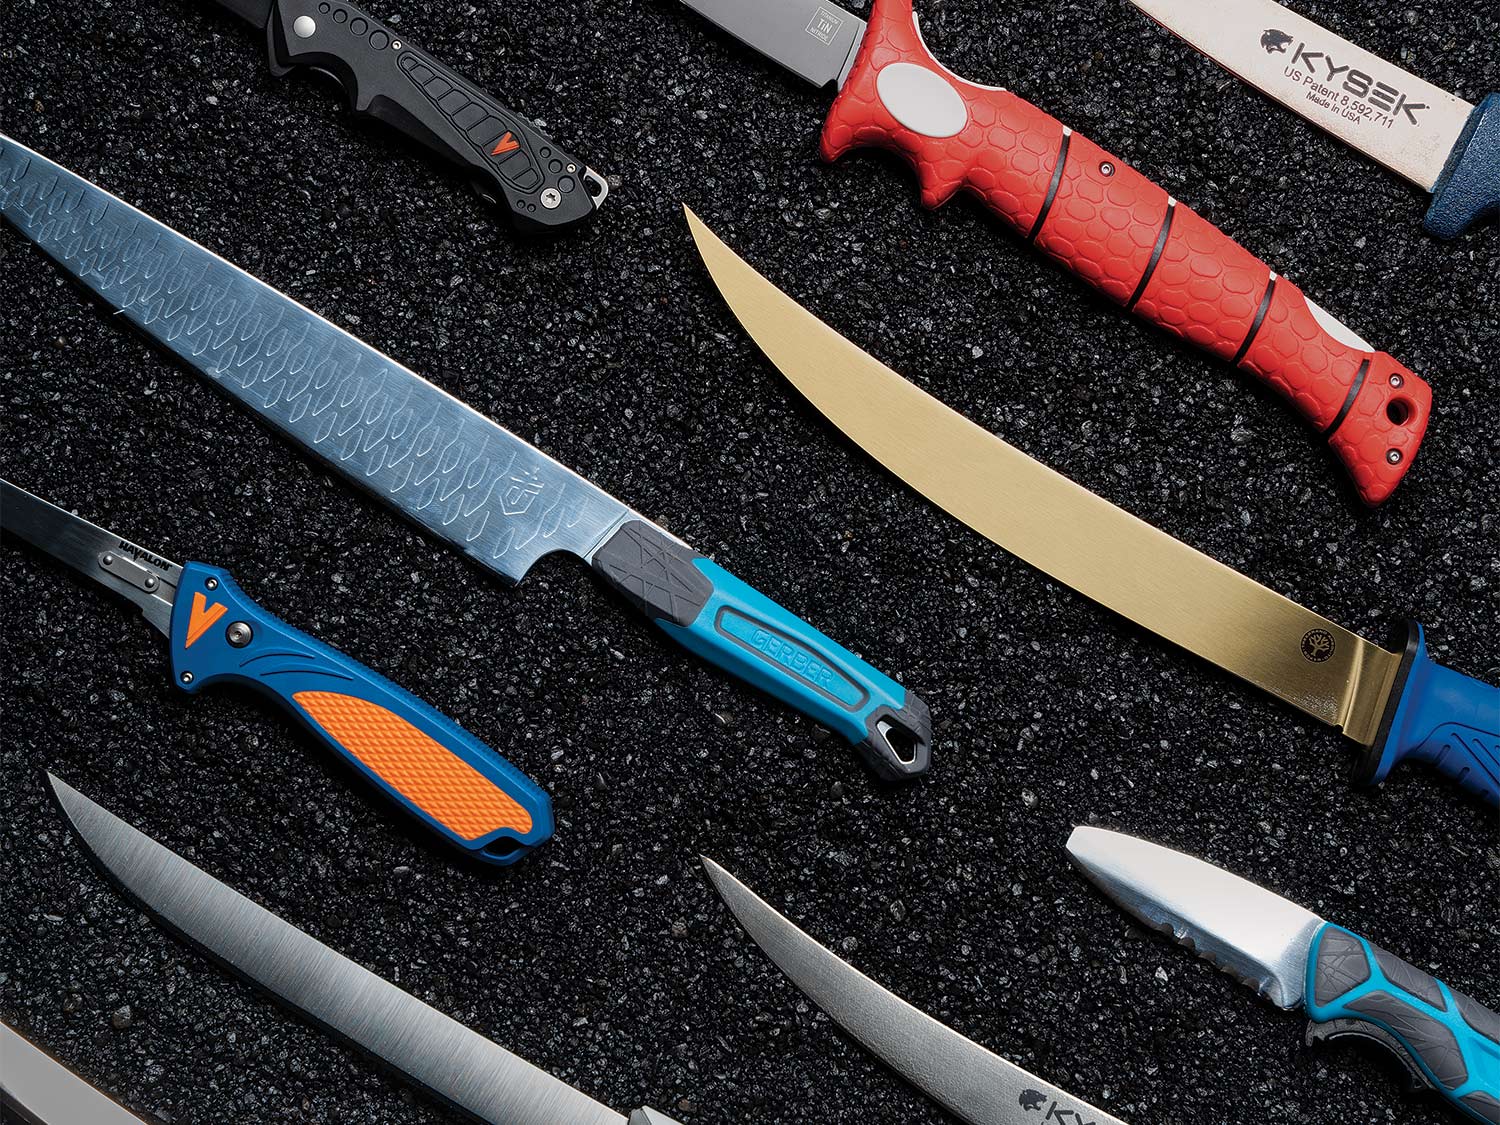 Choosing The Best Fishing Knives - Your Buyer's Guide To The Top